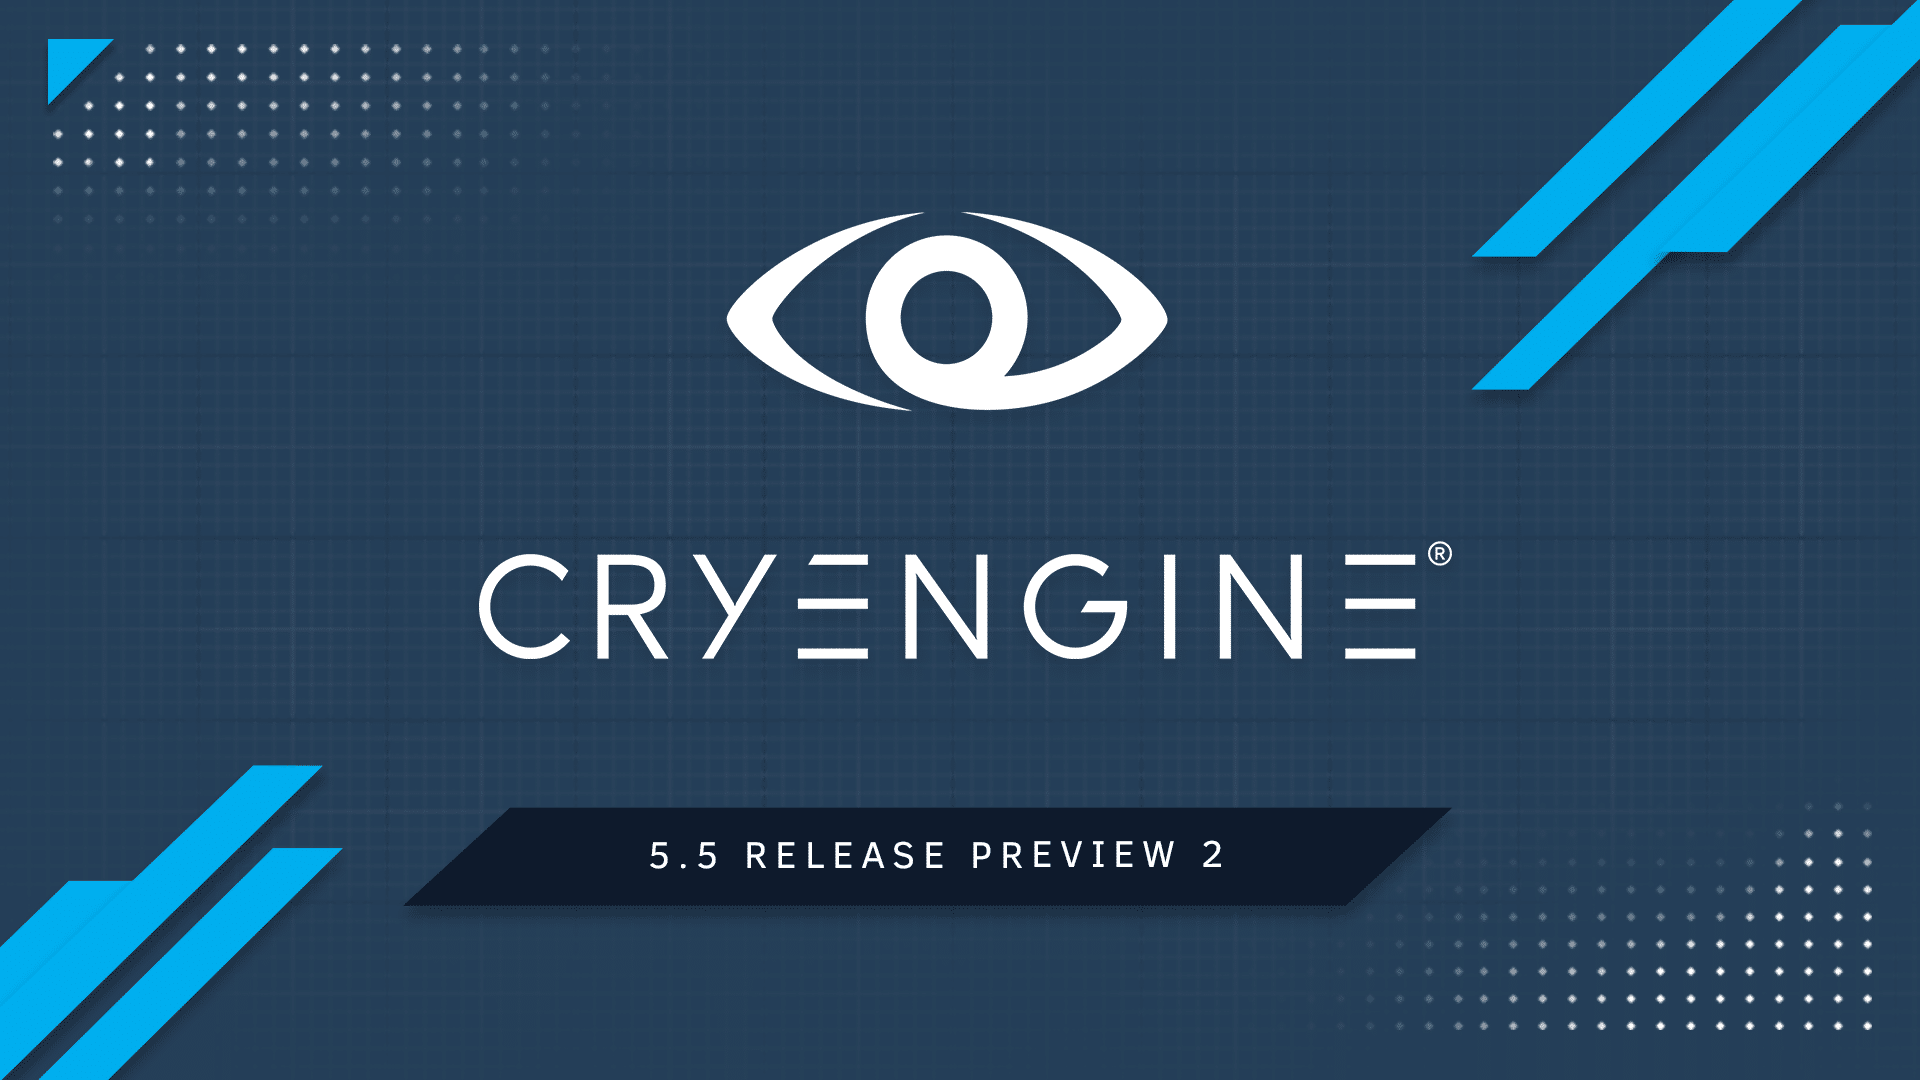 CRYENGINE 5.5 Preview 2 Live Now